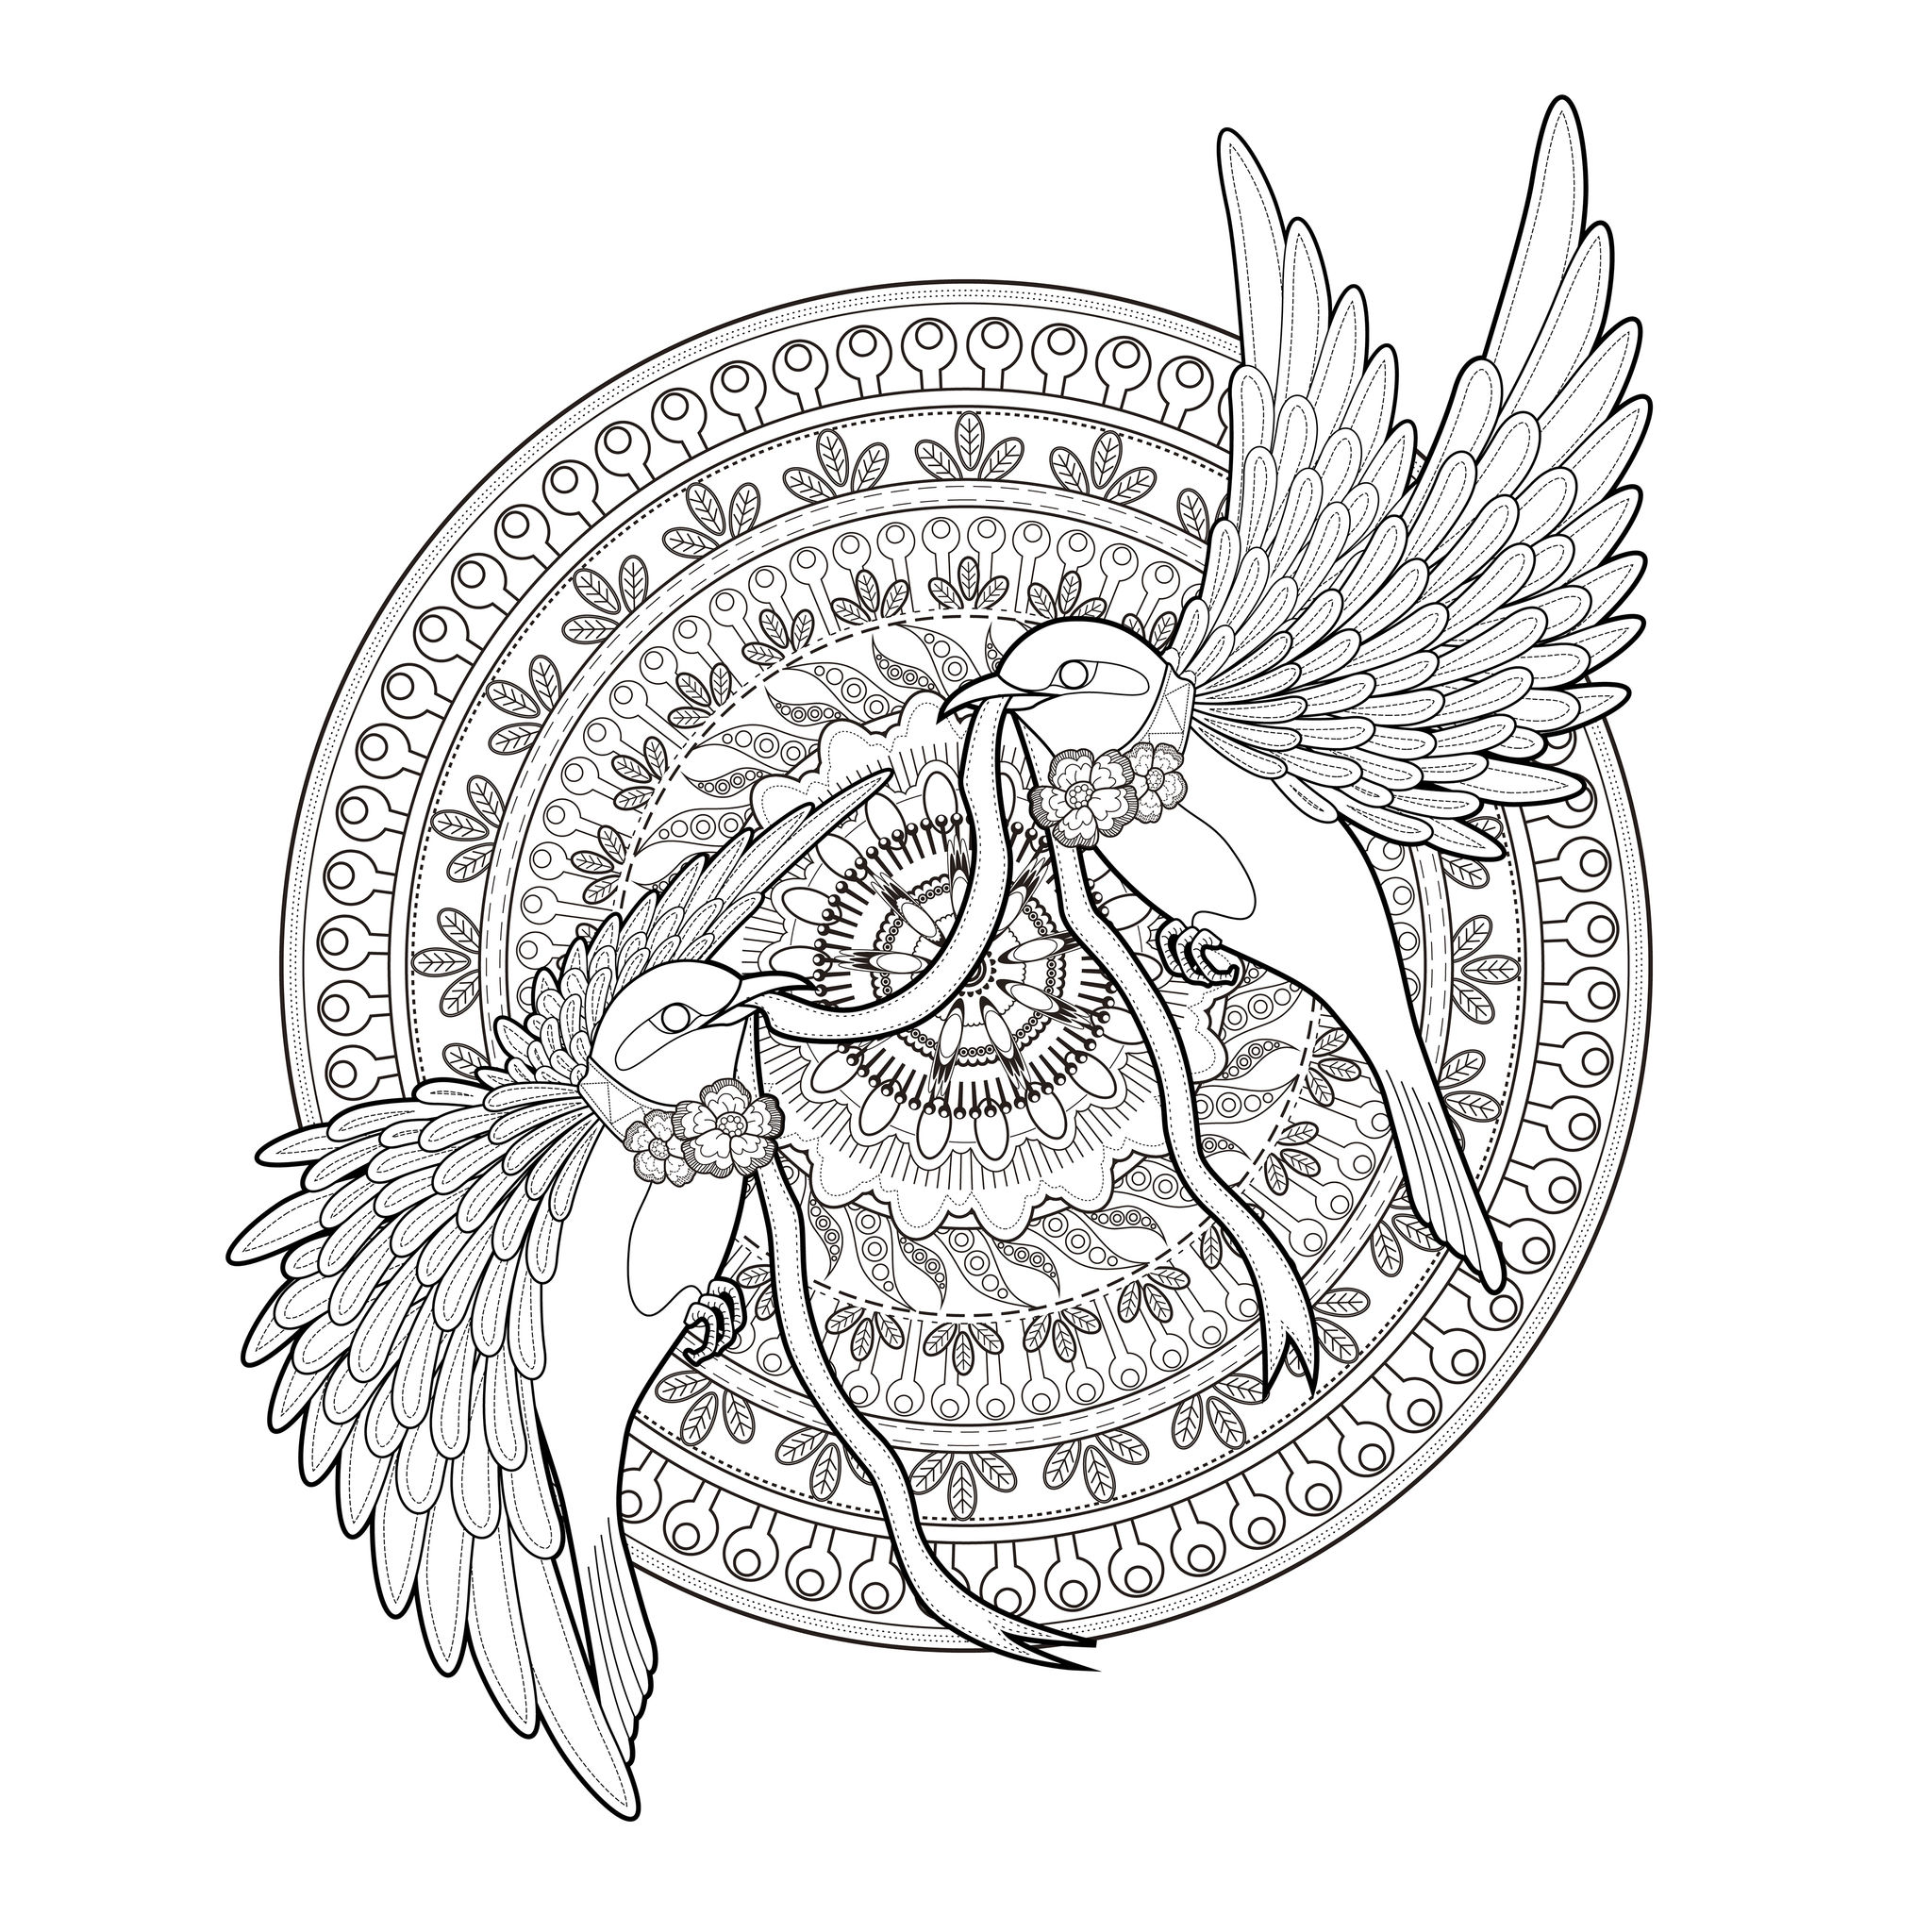 These peaceful swallows are ready to be colored in this incredible Mandala, you can print it and let your creativity guide you.